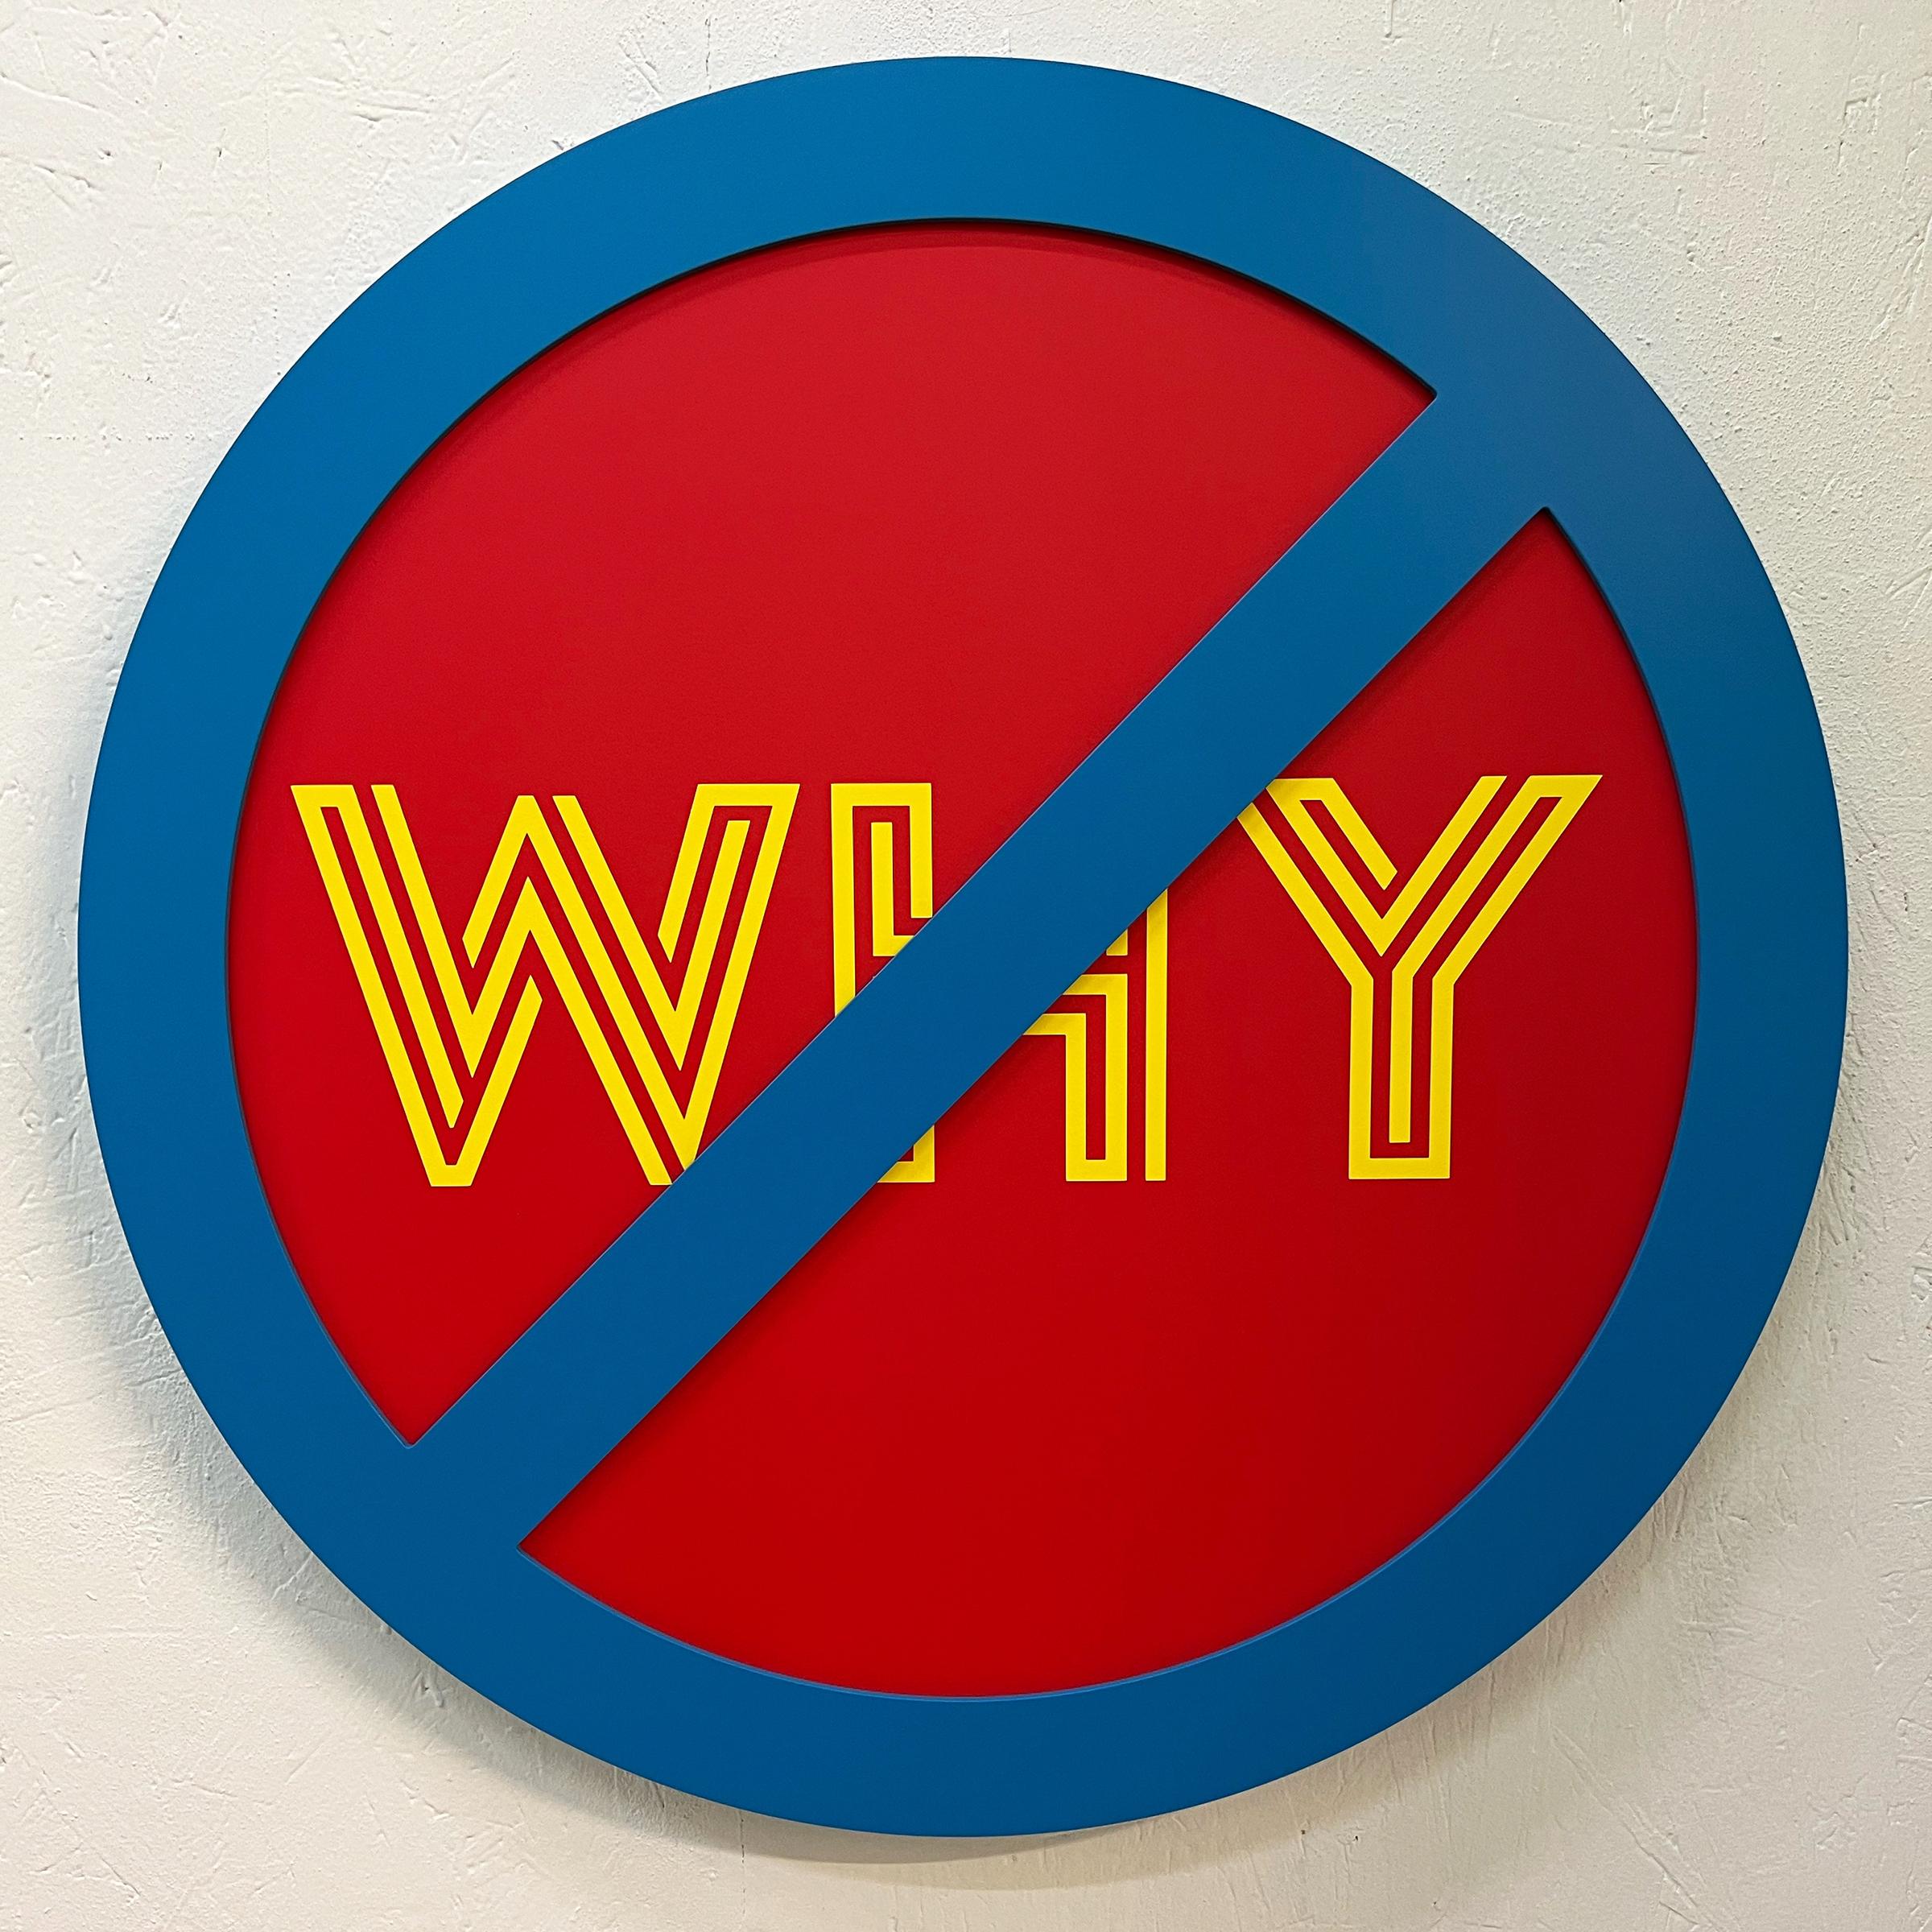 Michael Porten Portrait Painting - "No Why (Yellow on Red)" - conceptual art, contemporary pop - Lawrence Weiner